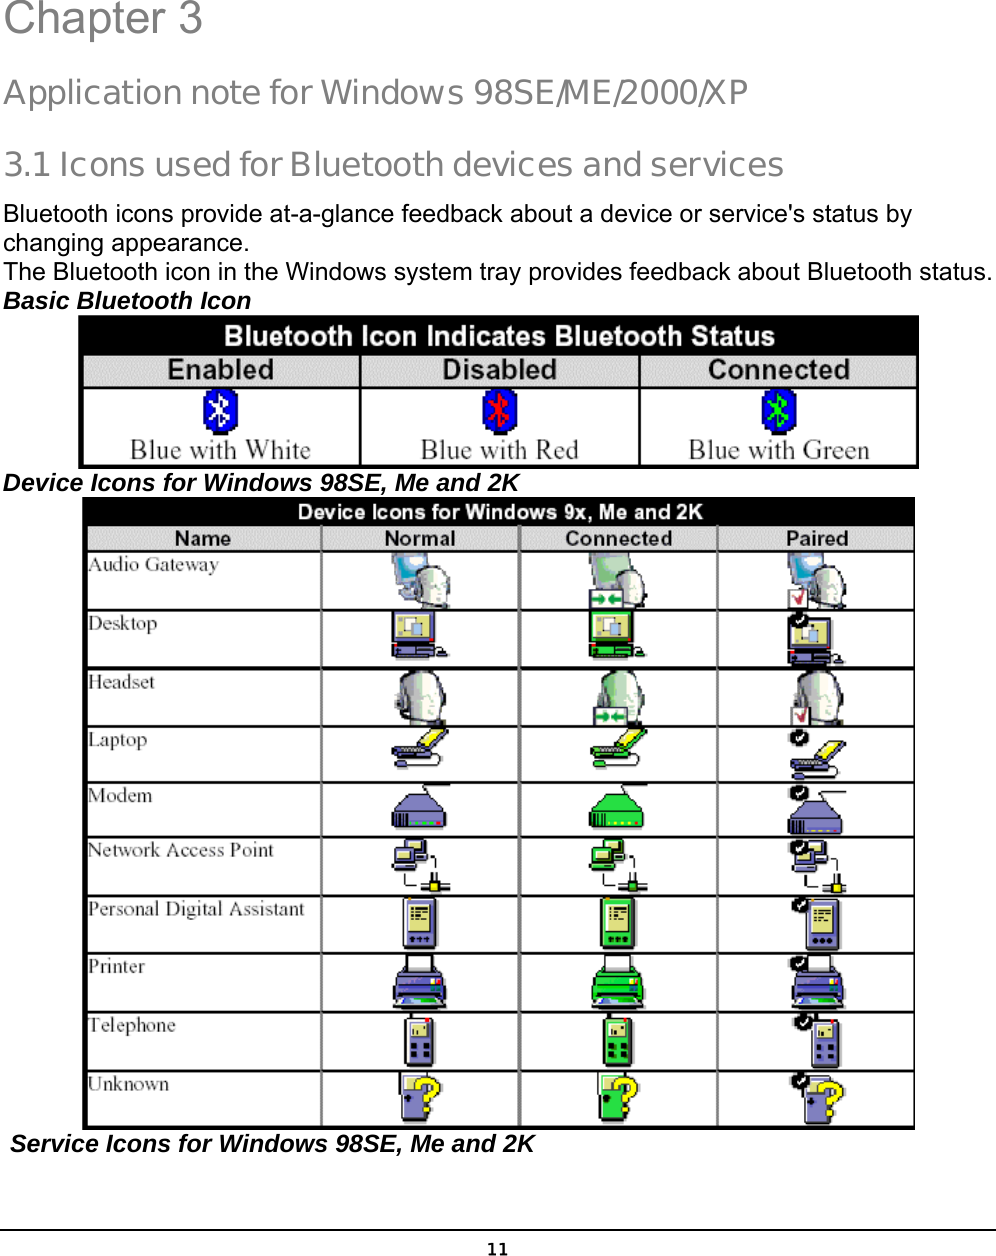  11  Chapter 3 Application note for Windows 98SE/ME/2000/XP 3.1 Icons used for Bluetooth devices and services  Bluetooth icons provide at-a-glance feedback about a device or service&apos;s status by changing appearance. The Bluetooth icon in the Windows system tray provides feedback about Bluetooth status. Basic Bluetooth Icon  Device Icons for Windows 98SE, Me and 2K   Service Icons for Windows 98SE, Me and 2K  3 